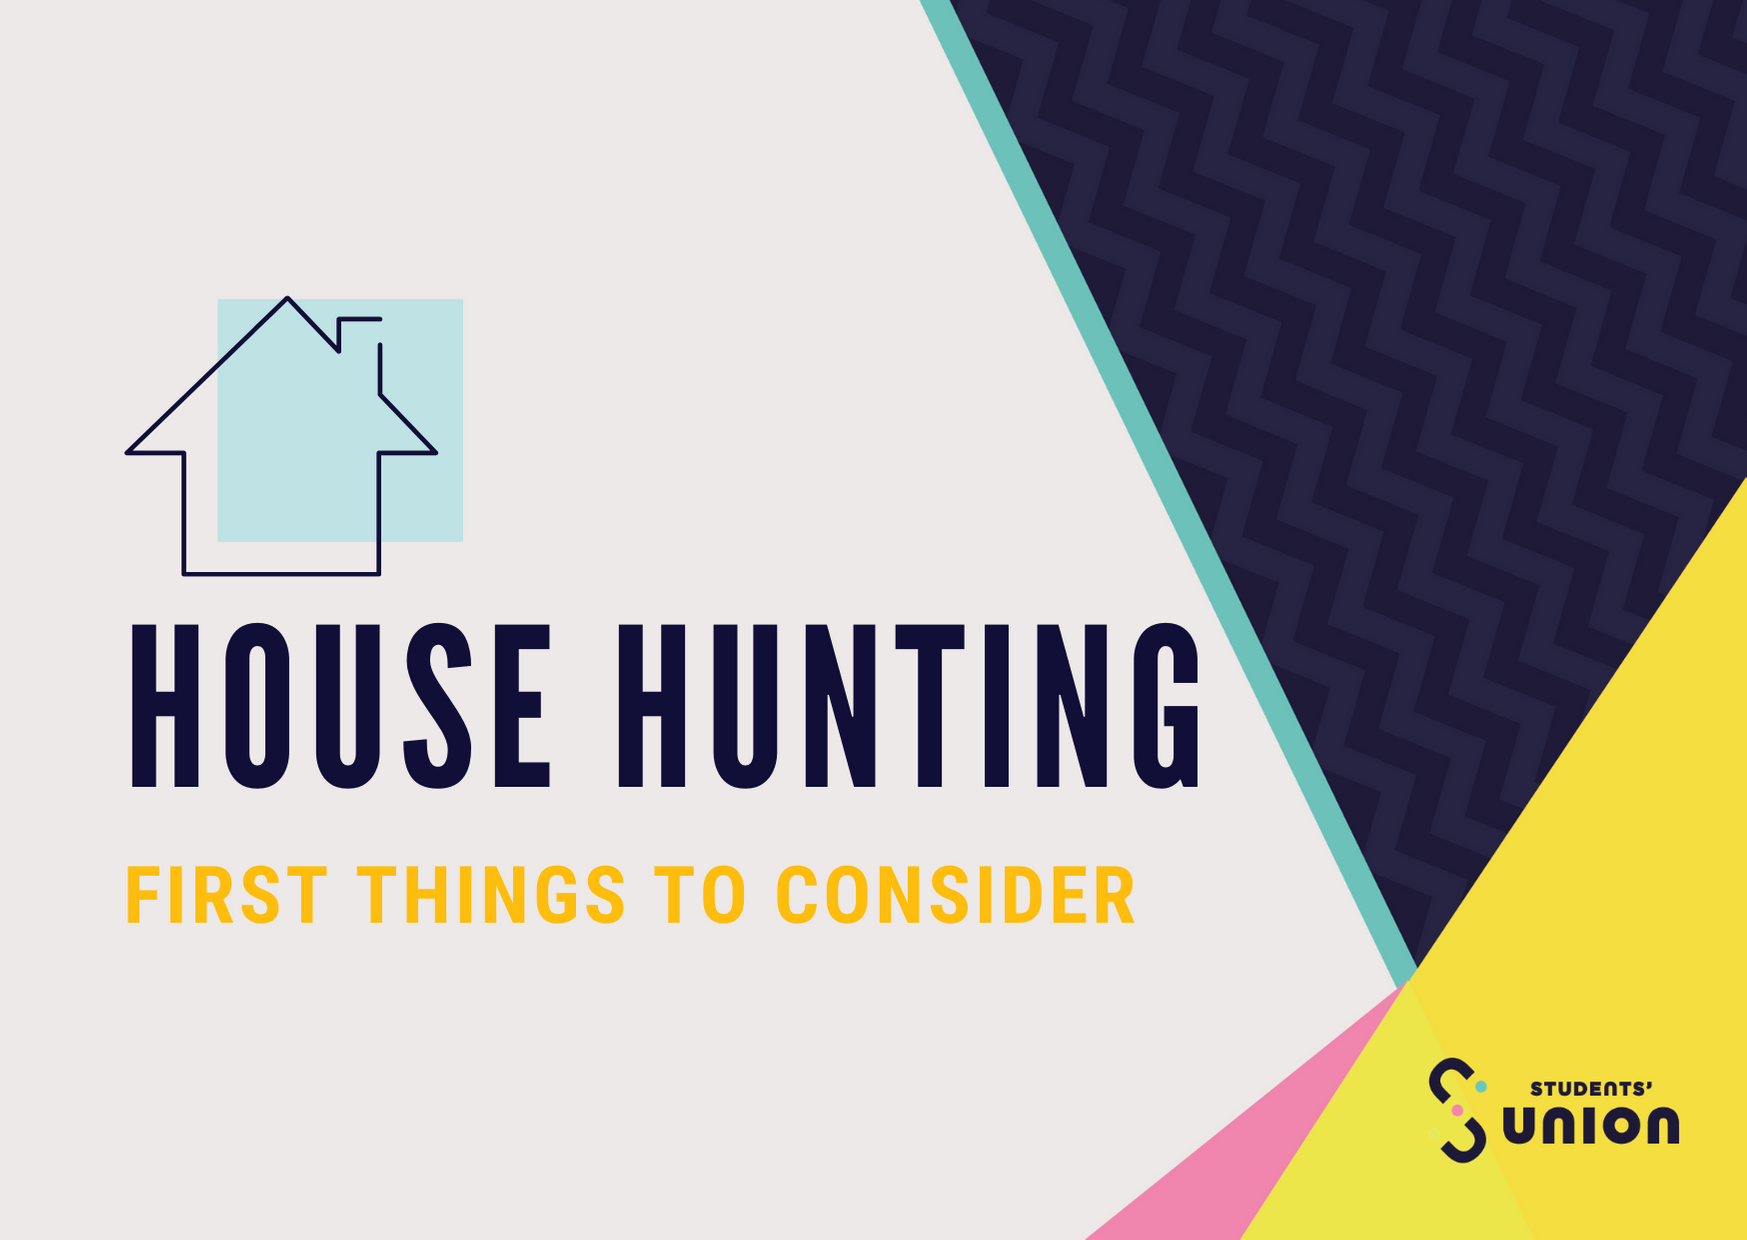 House Hunting Guide: First Things to Consider